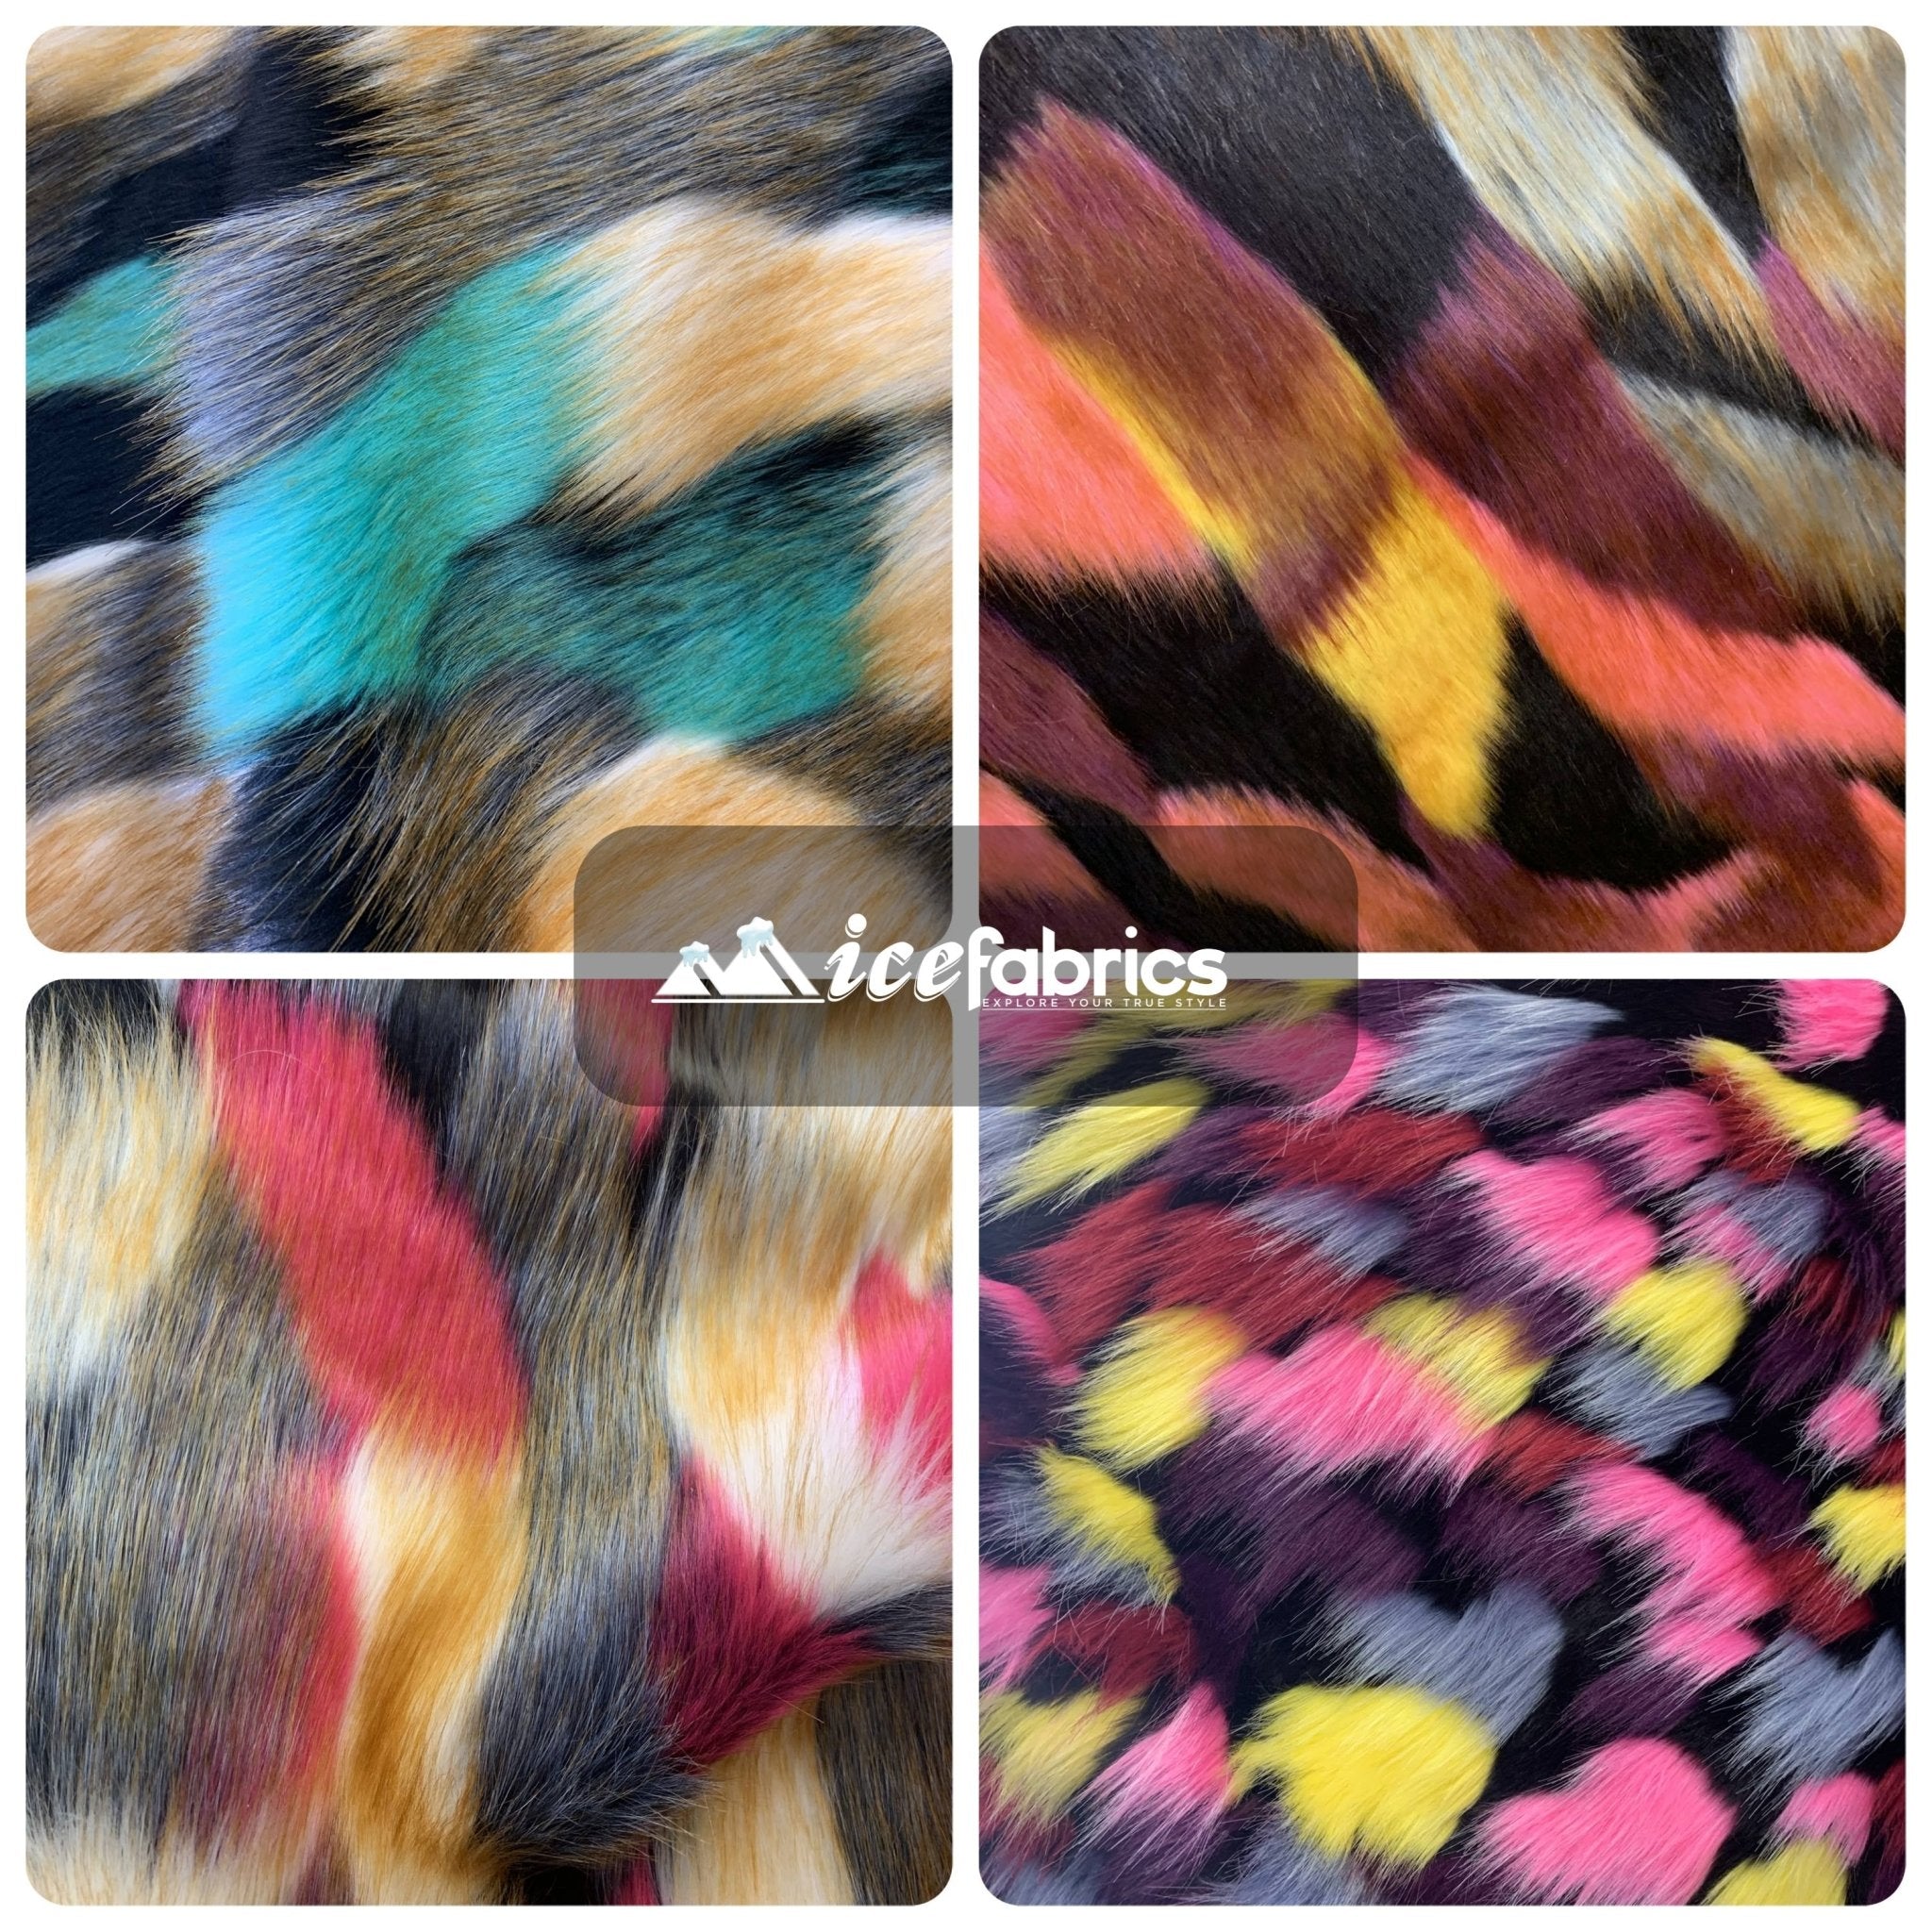 Multi-Color Animal Fake Faux Fur Fabric By The YardICEFABRICICE FABRICSGray Green BrownBy The Yard (60 inches Wide)Multi-Color Animal Fake Faux Fur Fabric By The Yard ICEFABRIC